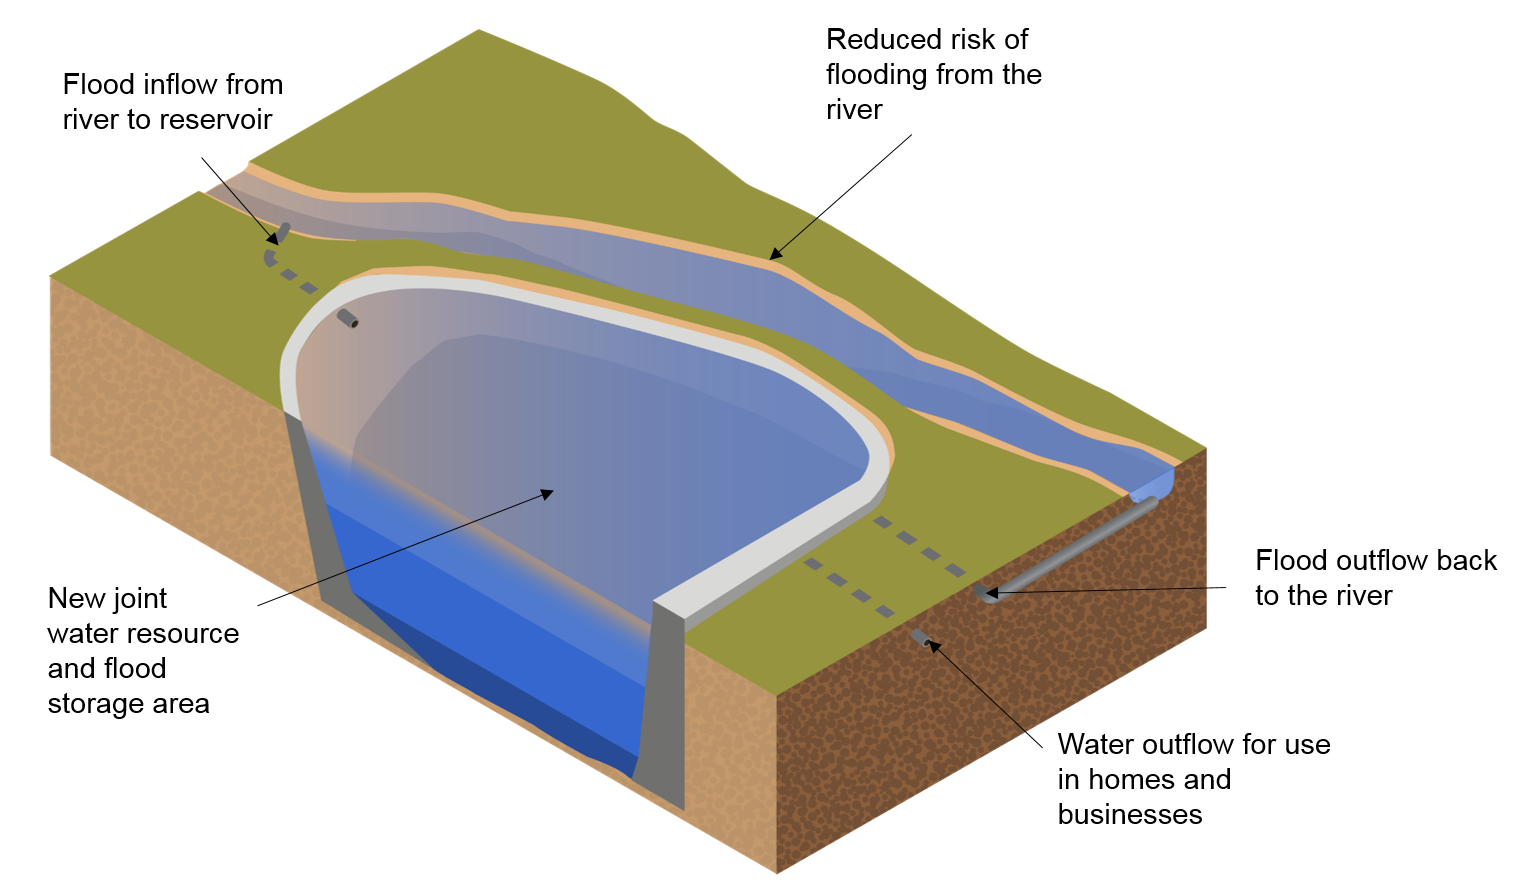 There is a river running from left to right of the image. At the top section of the river, water is diverted away from the river to a large reservoir nearby. At the bottom of the reservoir there is a water outflow for use in businesses and homes and a flood outflow to control water back to the river